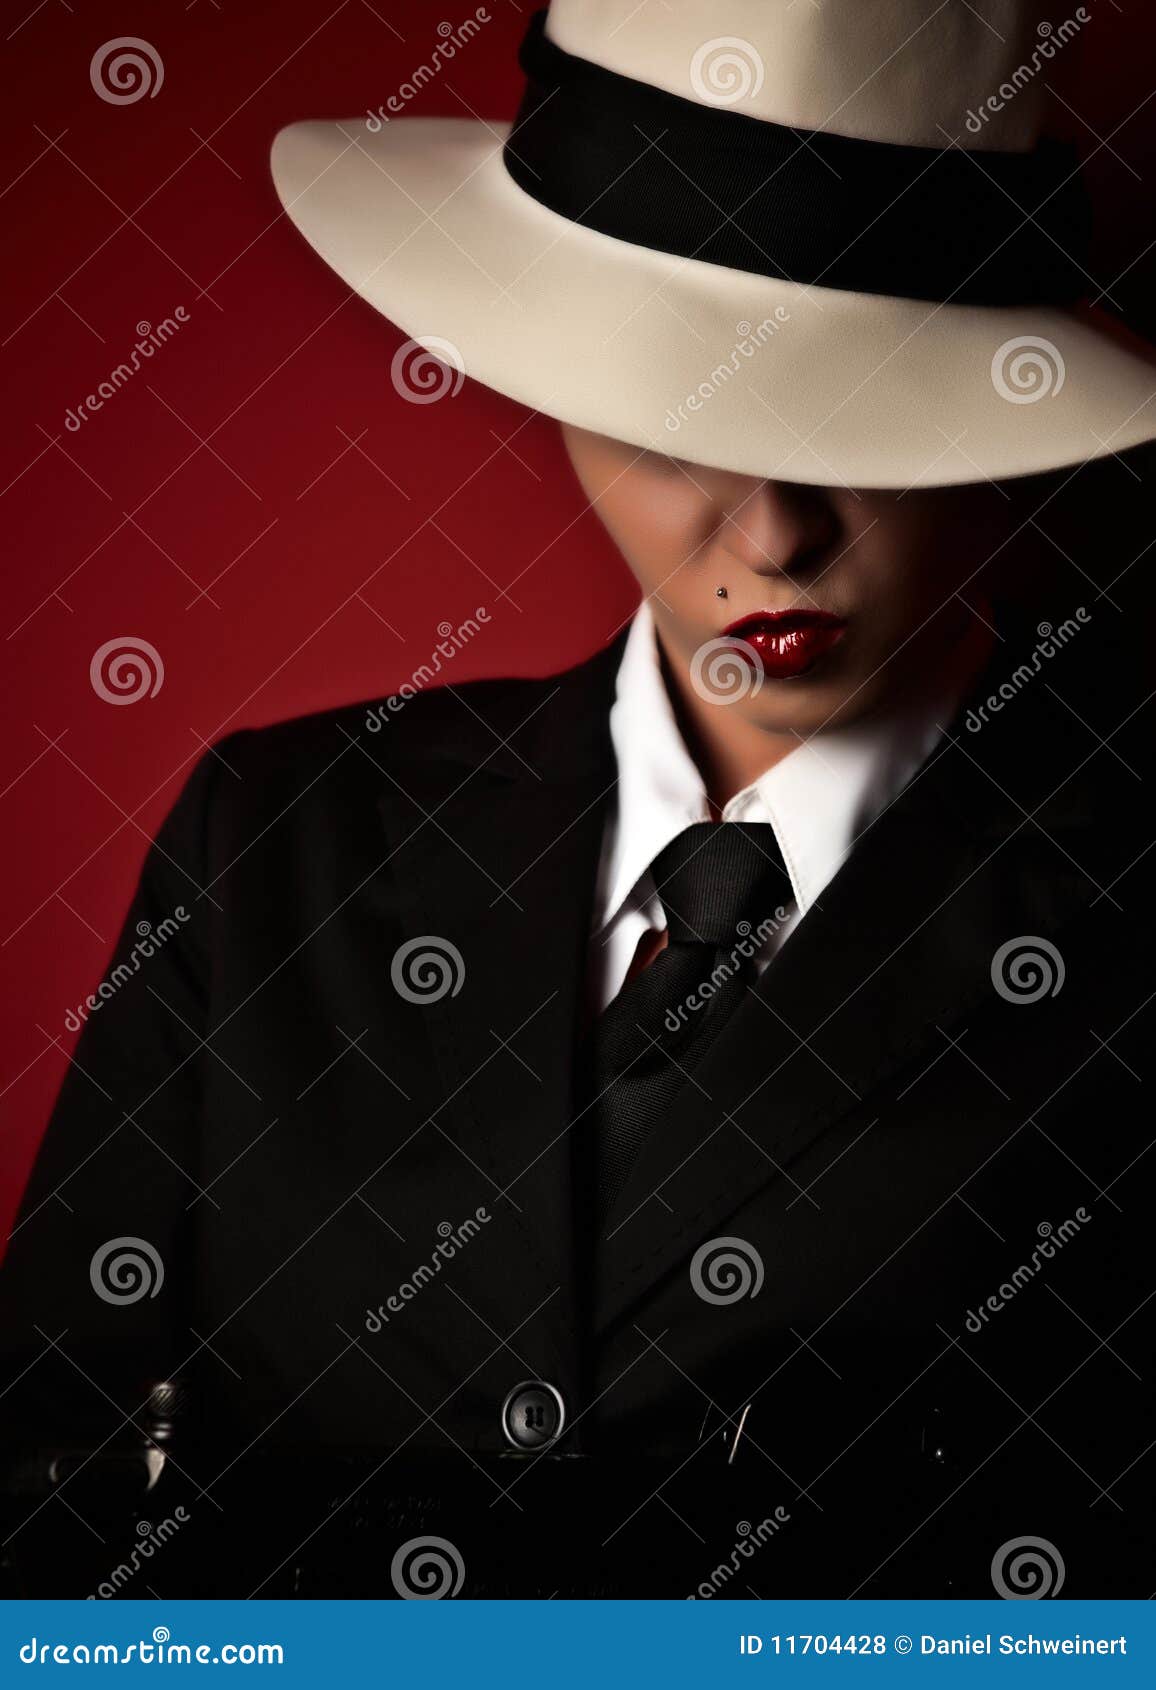 Female gangster stock photo. Image of beauty, tommygun - 11704428